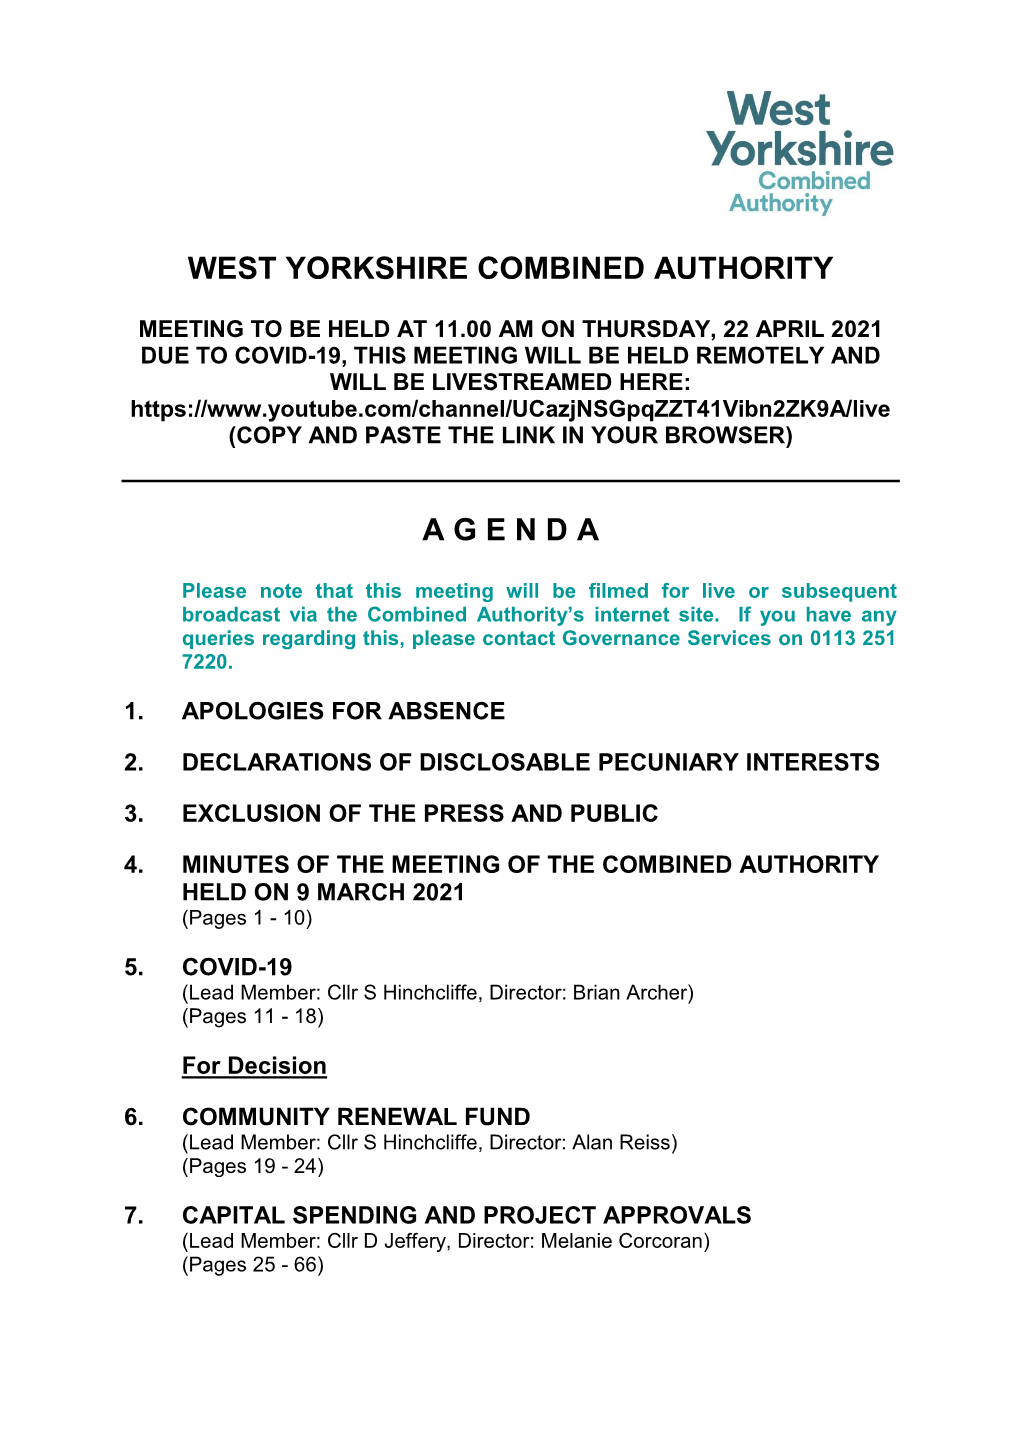 (Public Pack)Agenda Document for West Yorkshire Combined